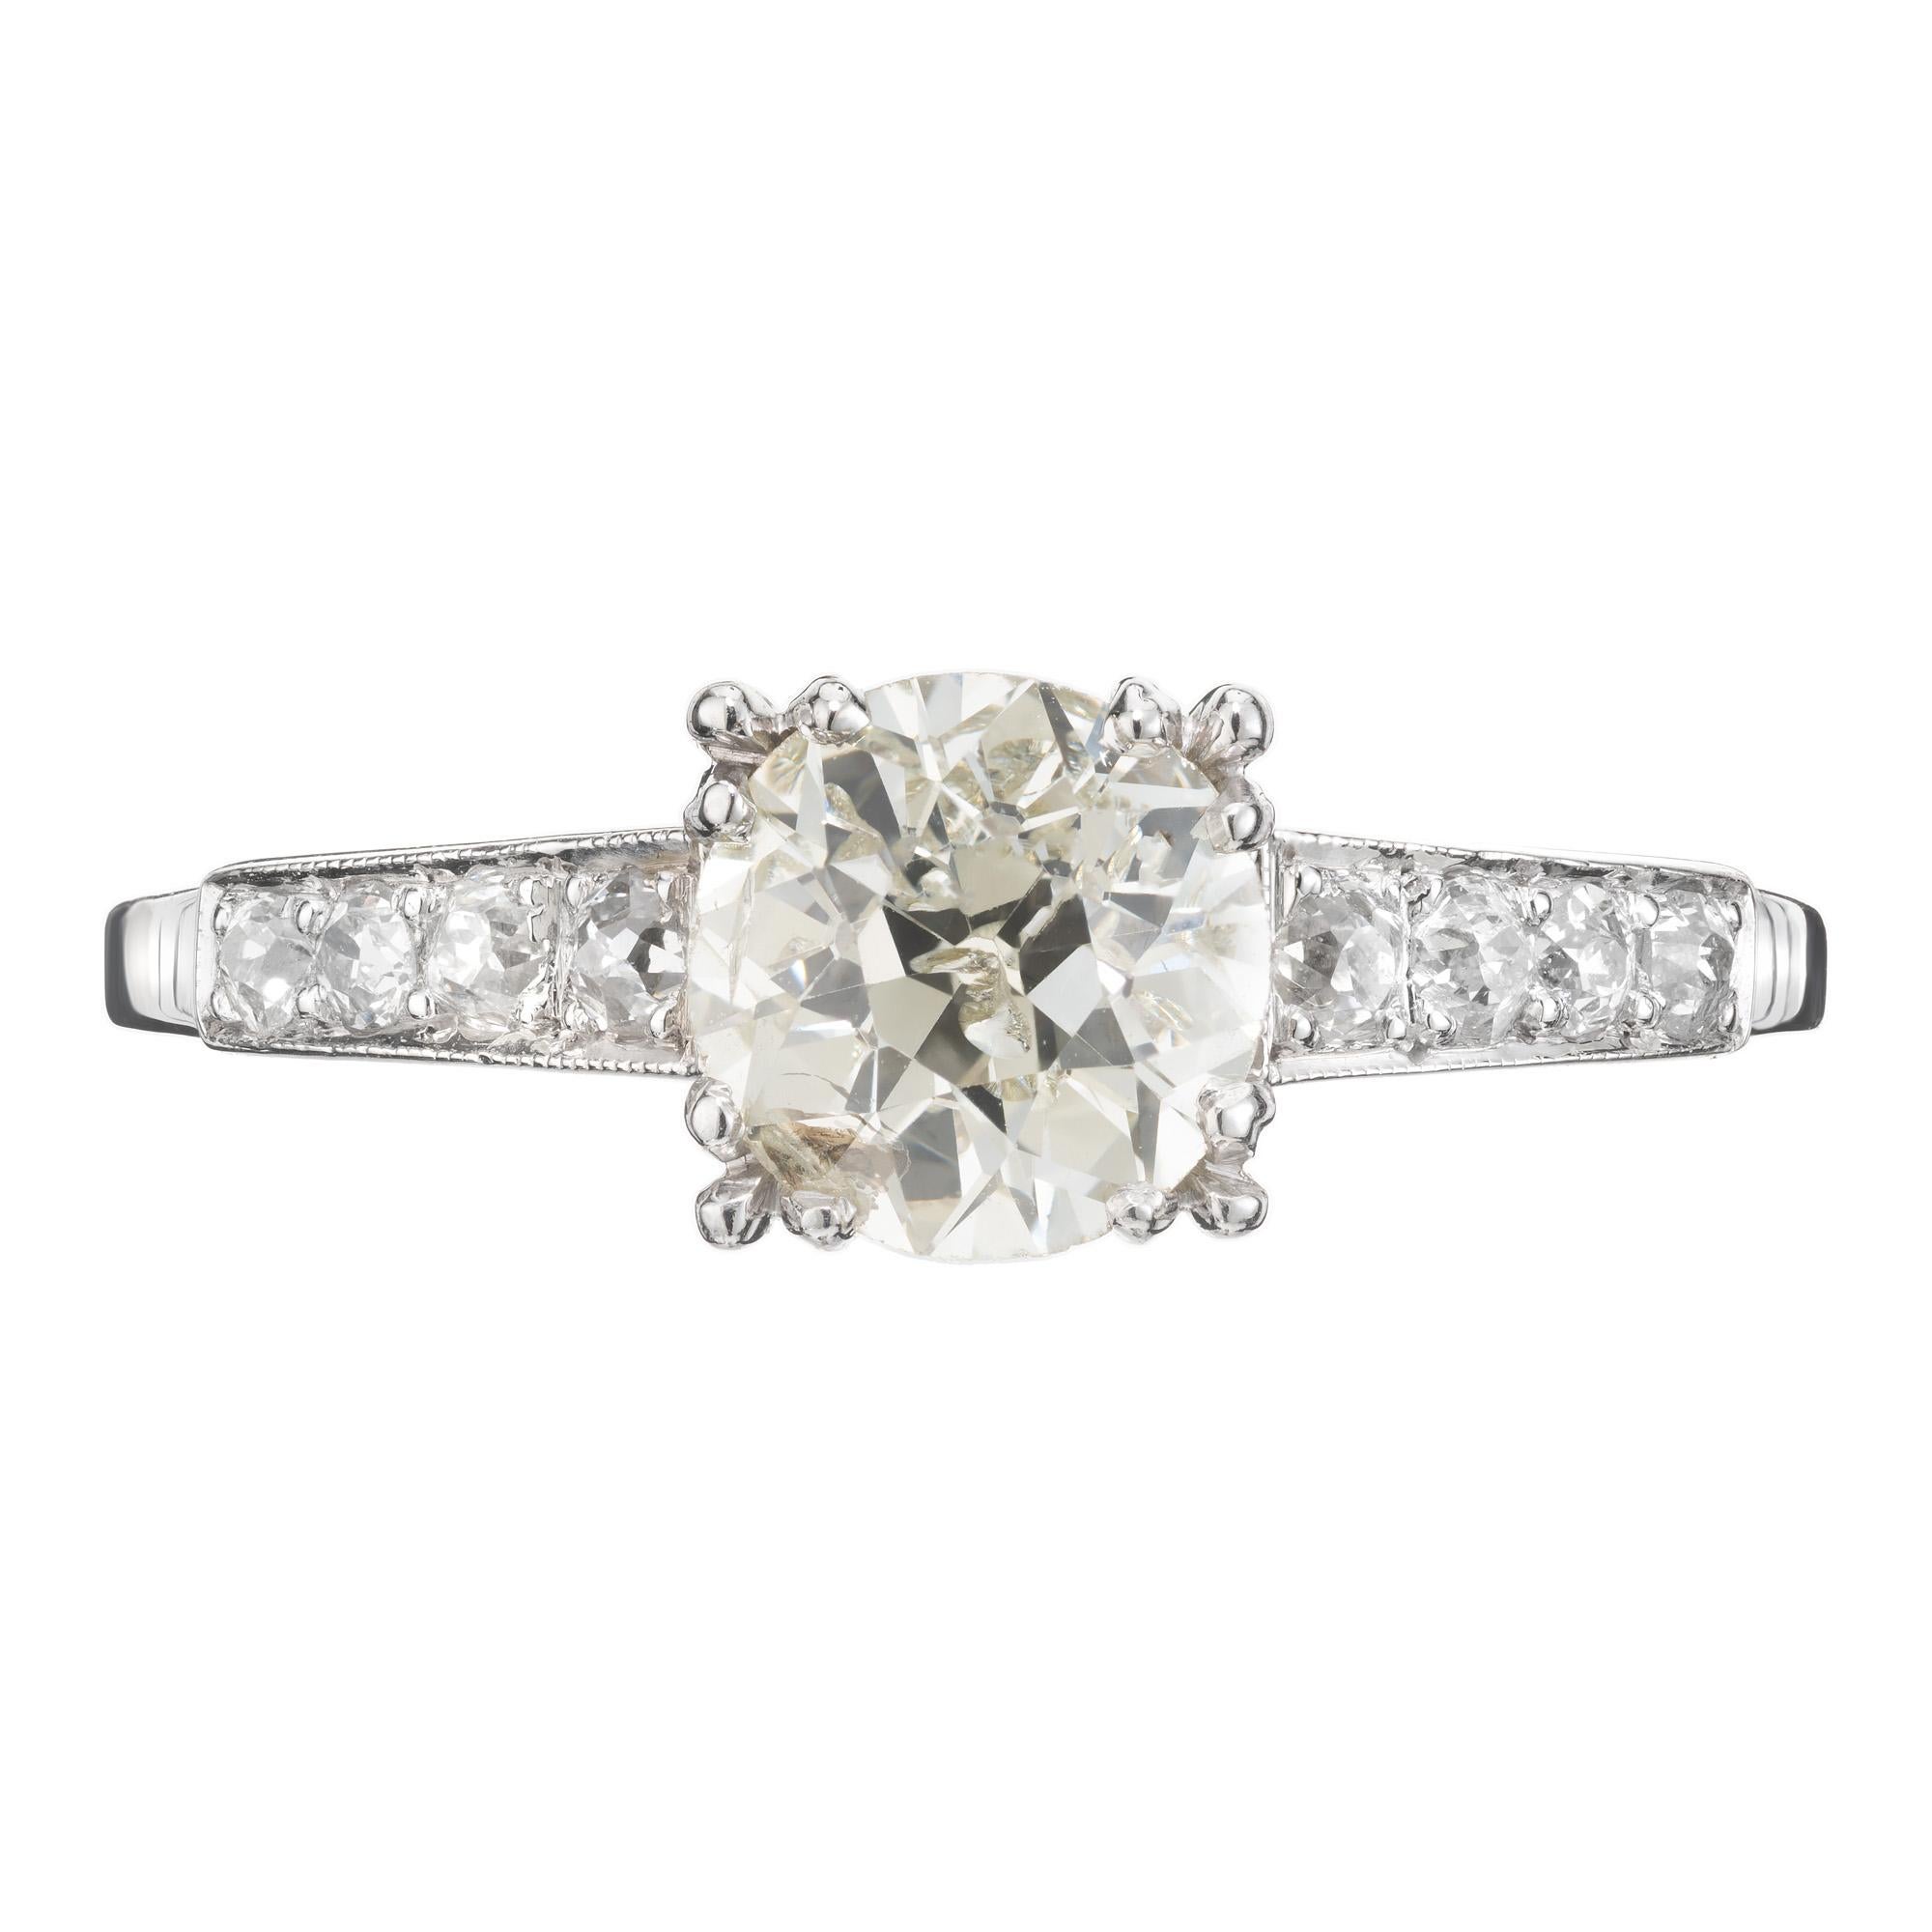 Early 1900's exquisite EGL Certified diamond platinum engagement ring. Old European cut 1.15ct is graded by the EGL as L, faint yellow hue with beautiful brilliance. Set in a lustrous platinum setting with four Old European diamonds on each